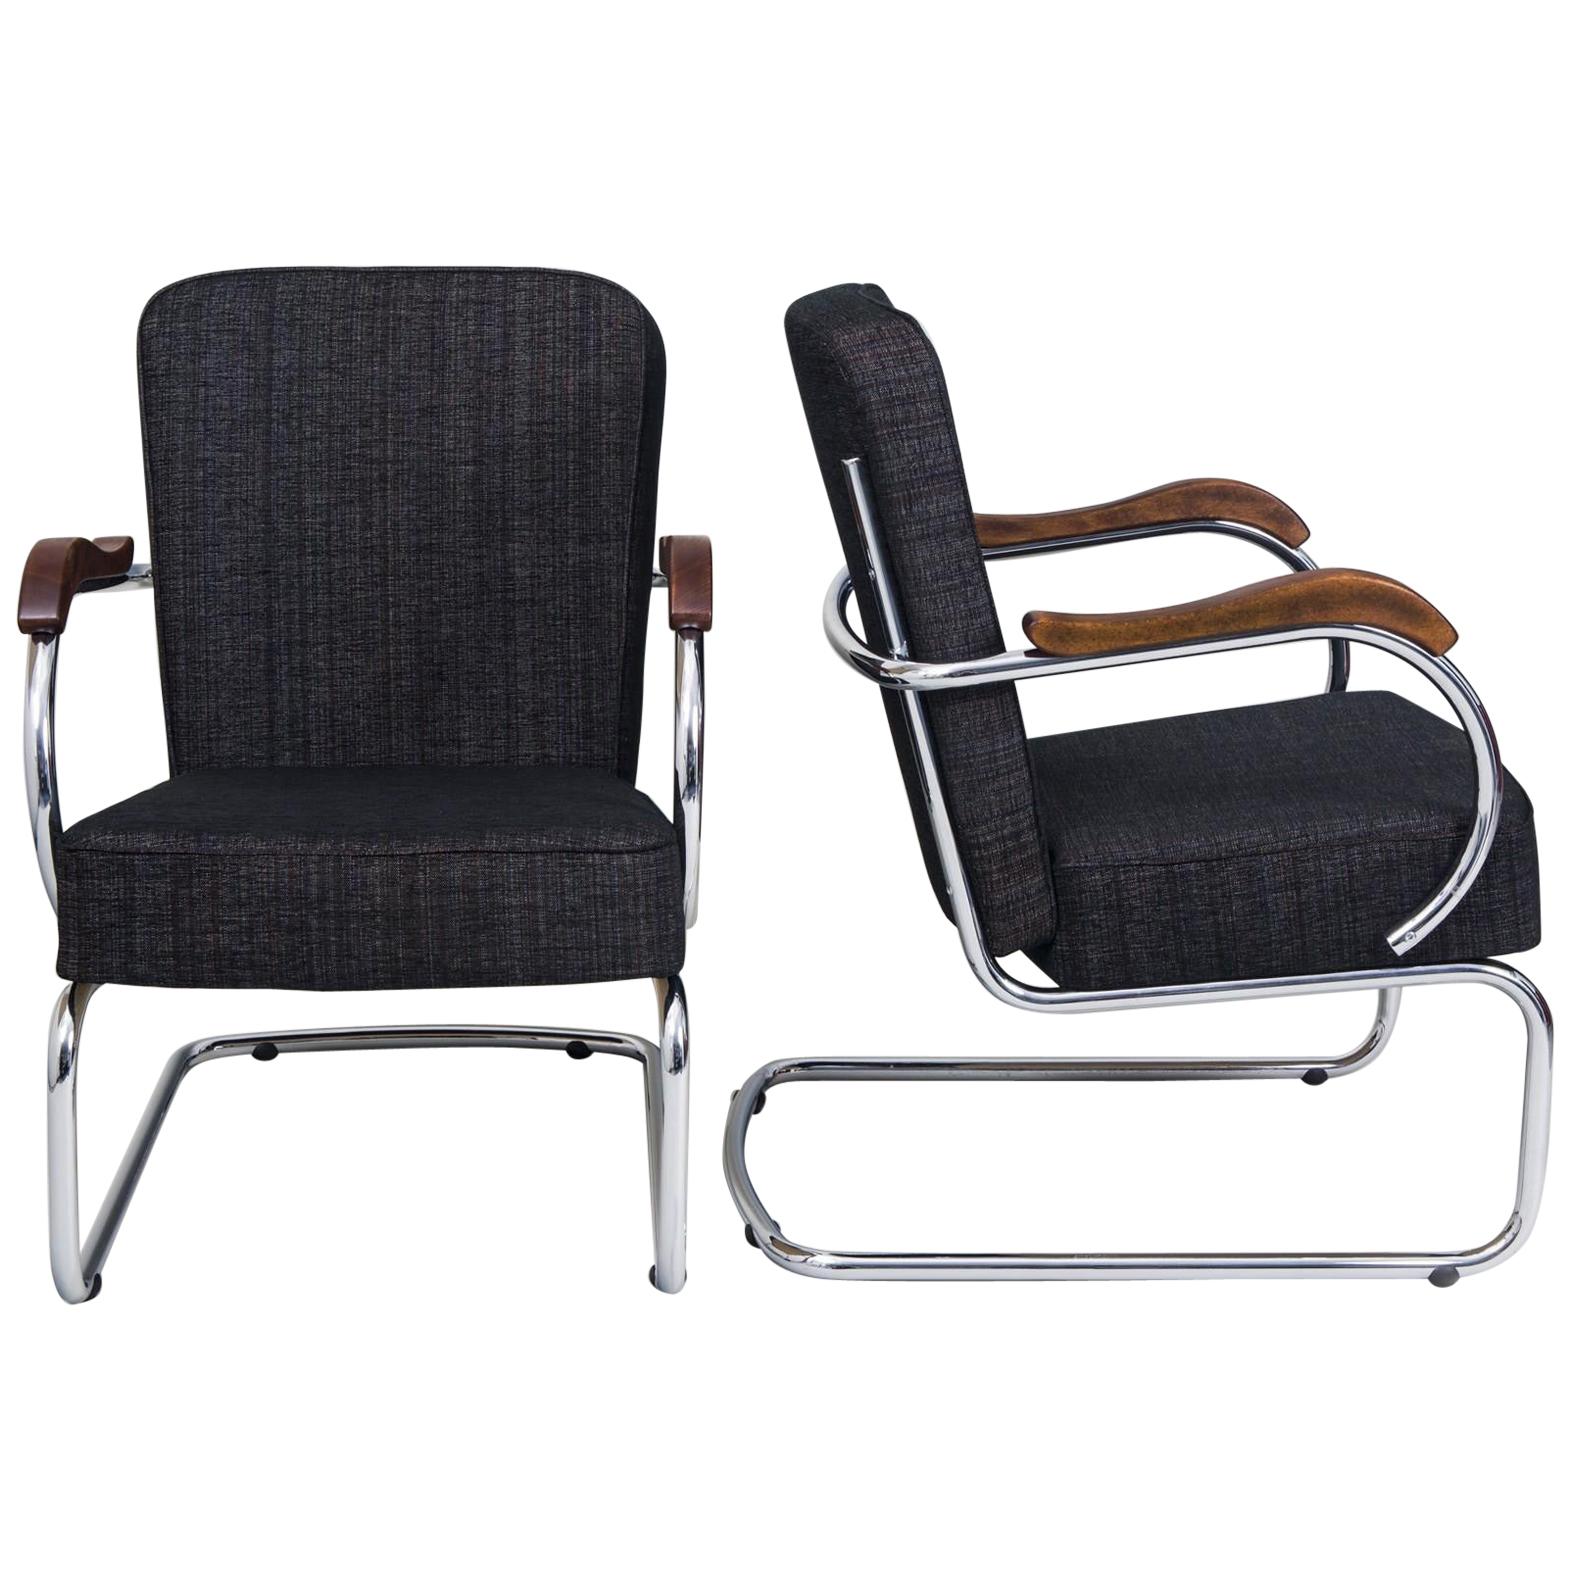 Pair of Chrome Tubular Armchairs by Kovona, New Upholstery, 1960s For Sale